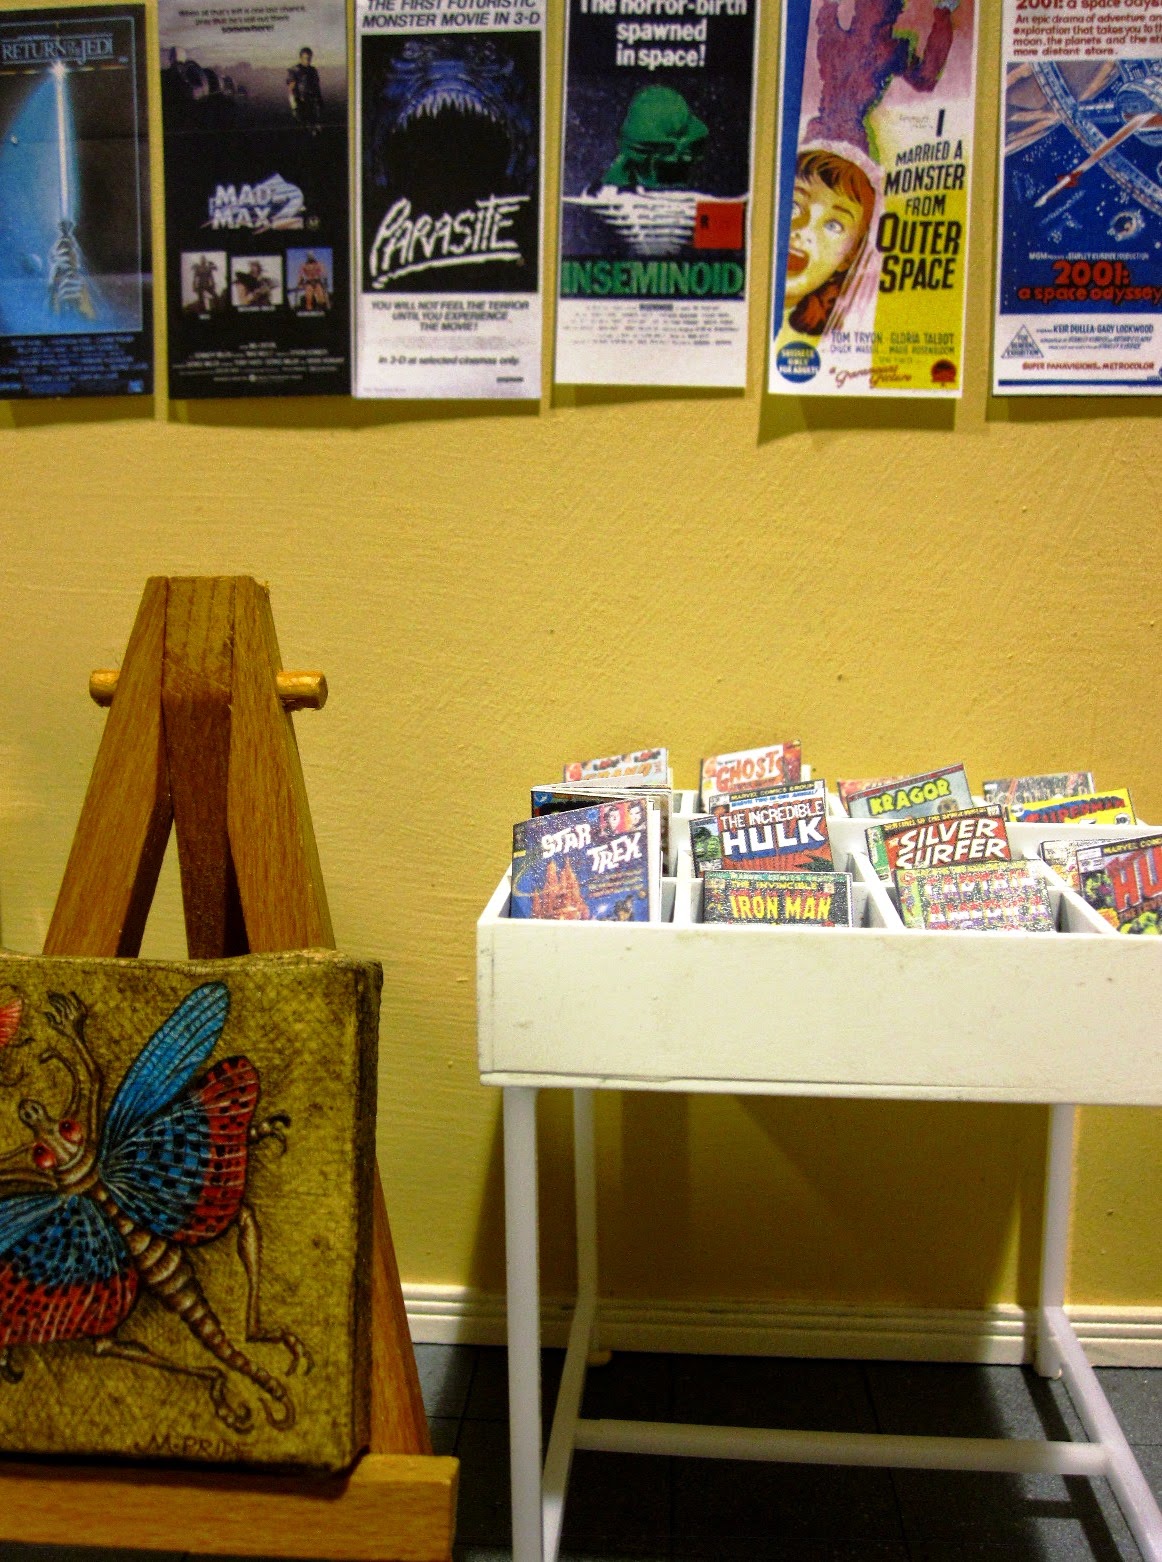 Modern miniature comic book store, interior view showing a rack of comics, a wall of posters and a fantasy art piece on an easel.